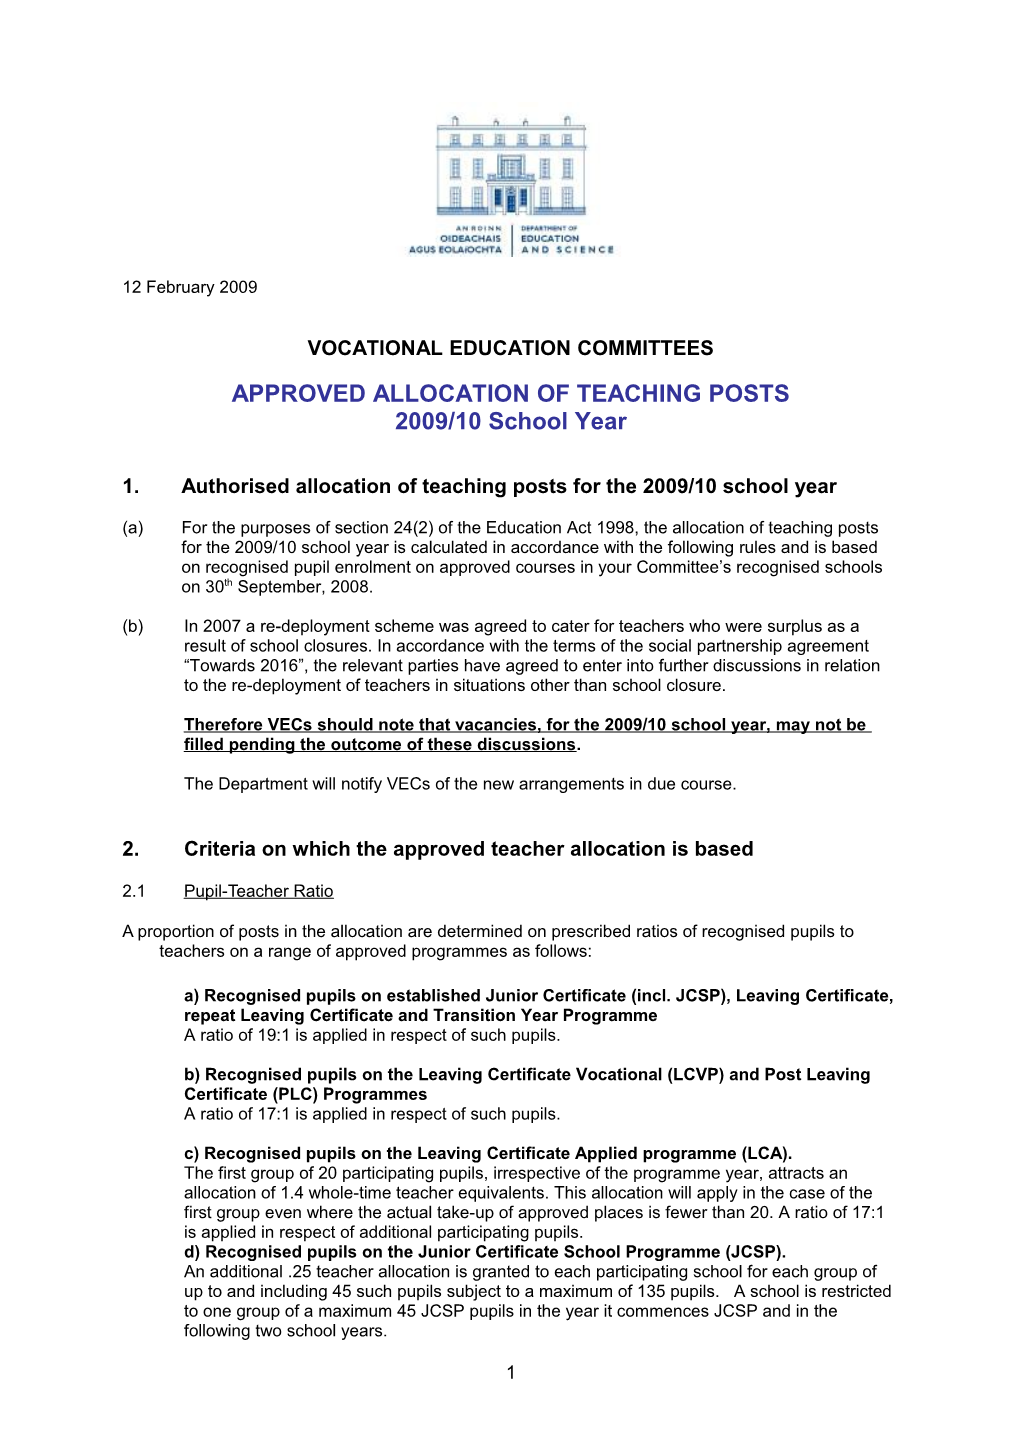 Approved Allocation of Teaching Posts for the 2007/08 School Year - VEC Schools (File Format